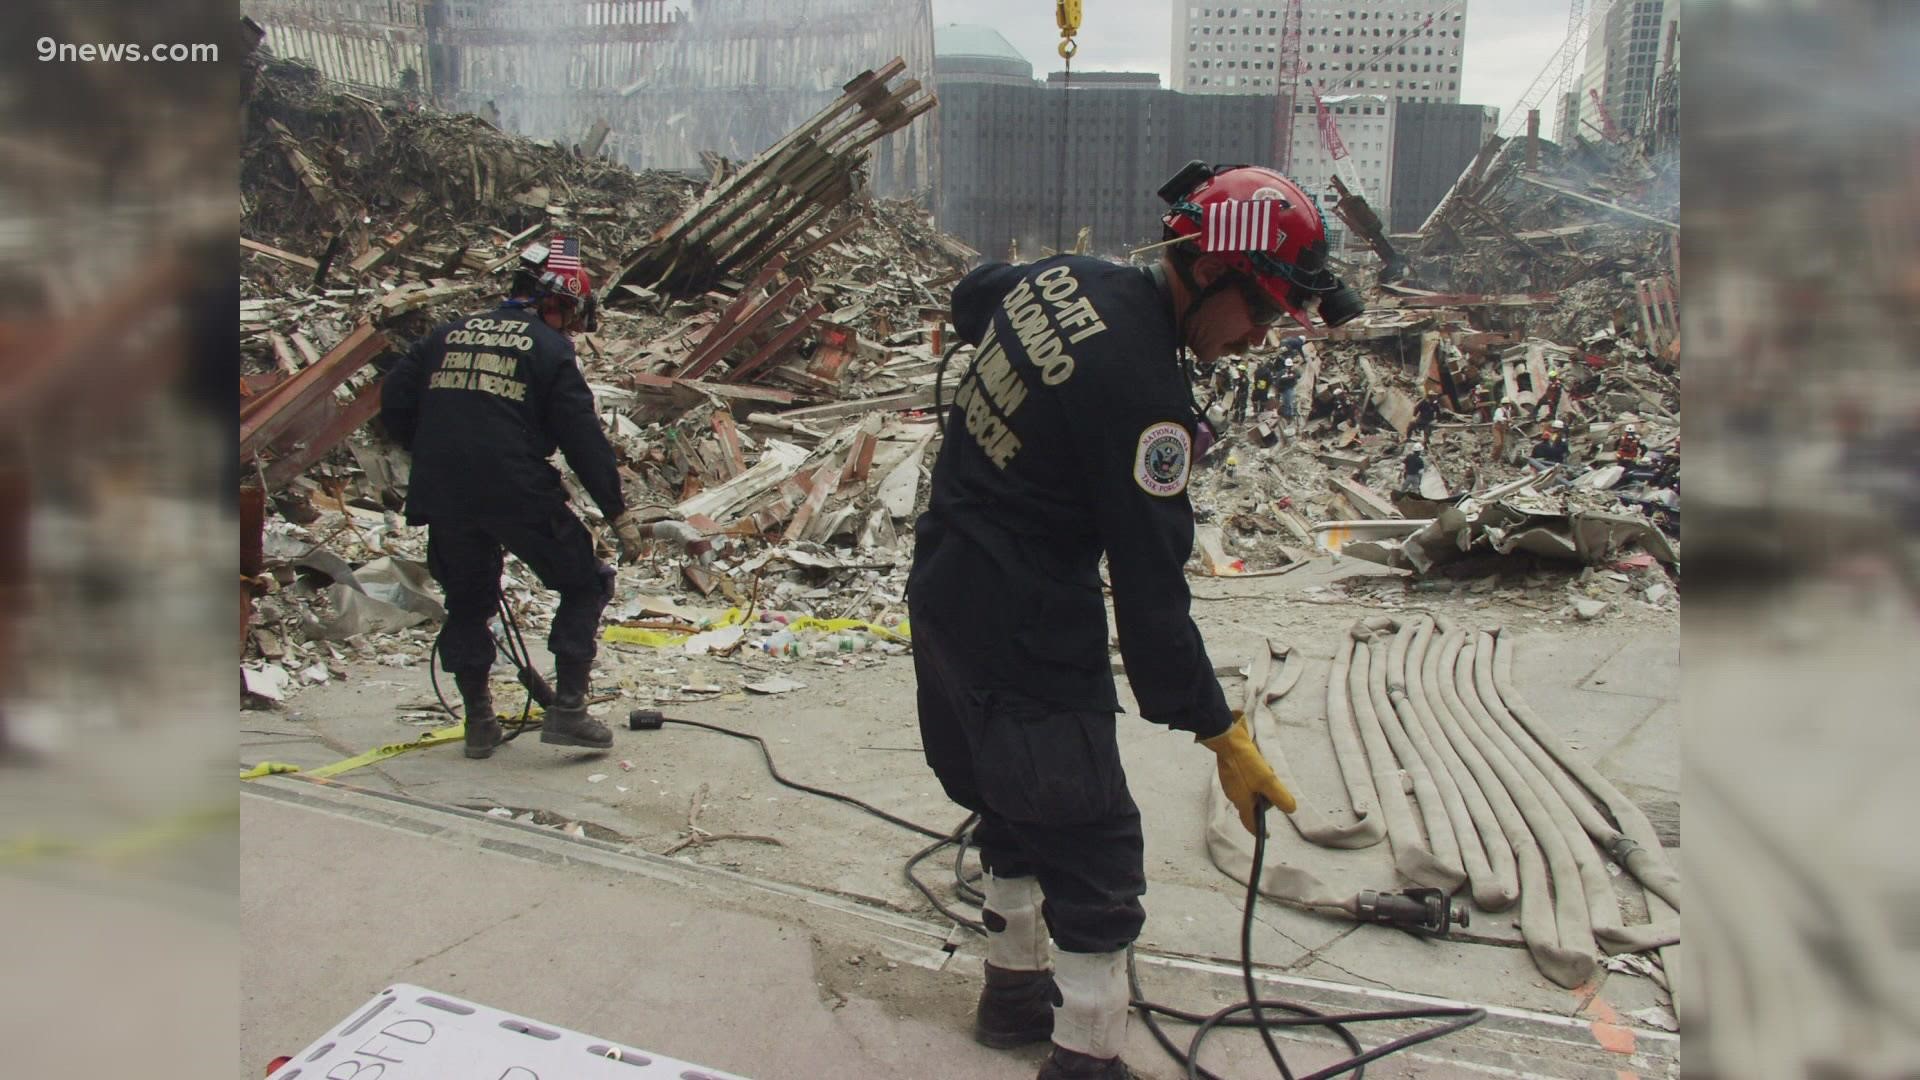 Colorado Task Force 1 worked on cleaning the debris from the Twin Towers on 9/11. They got there just as the recovery operation was beginning.